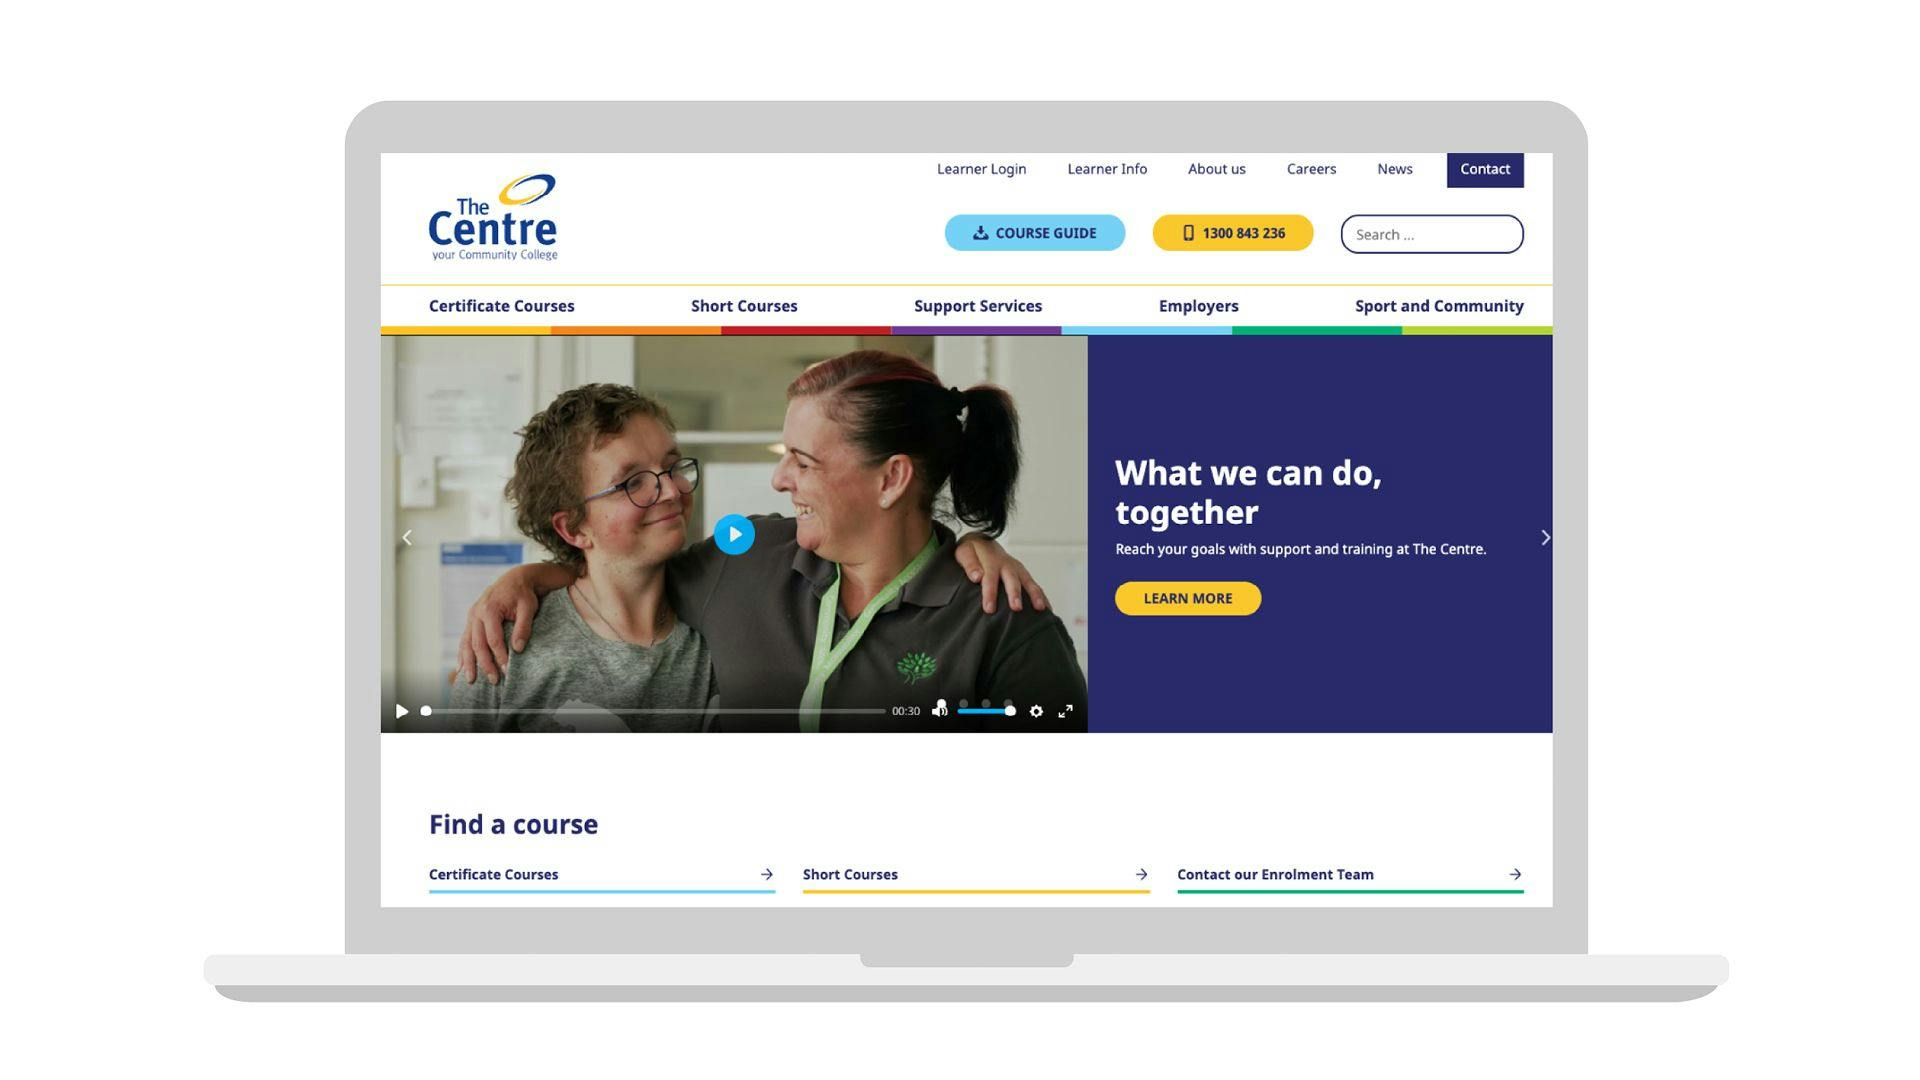 The Centre website home page